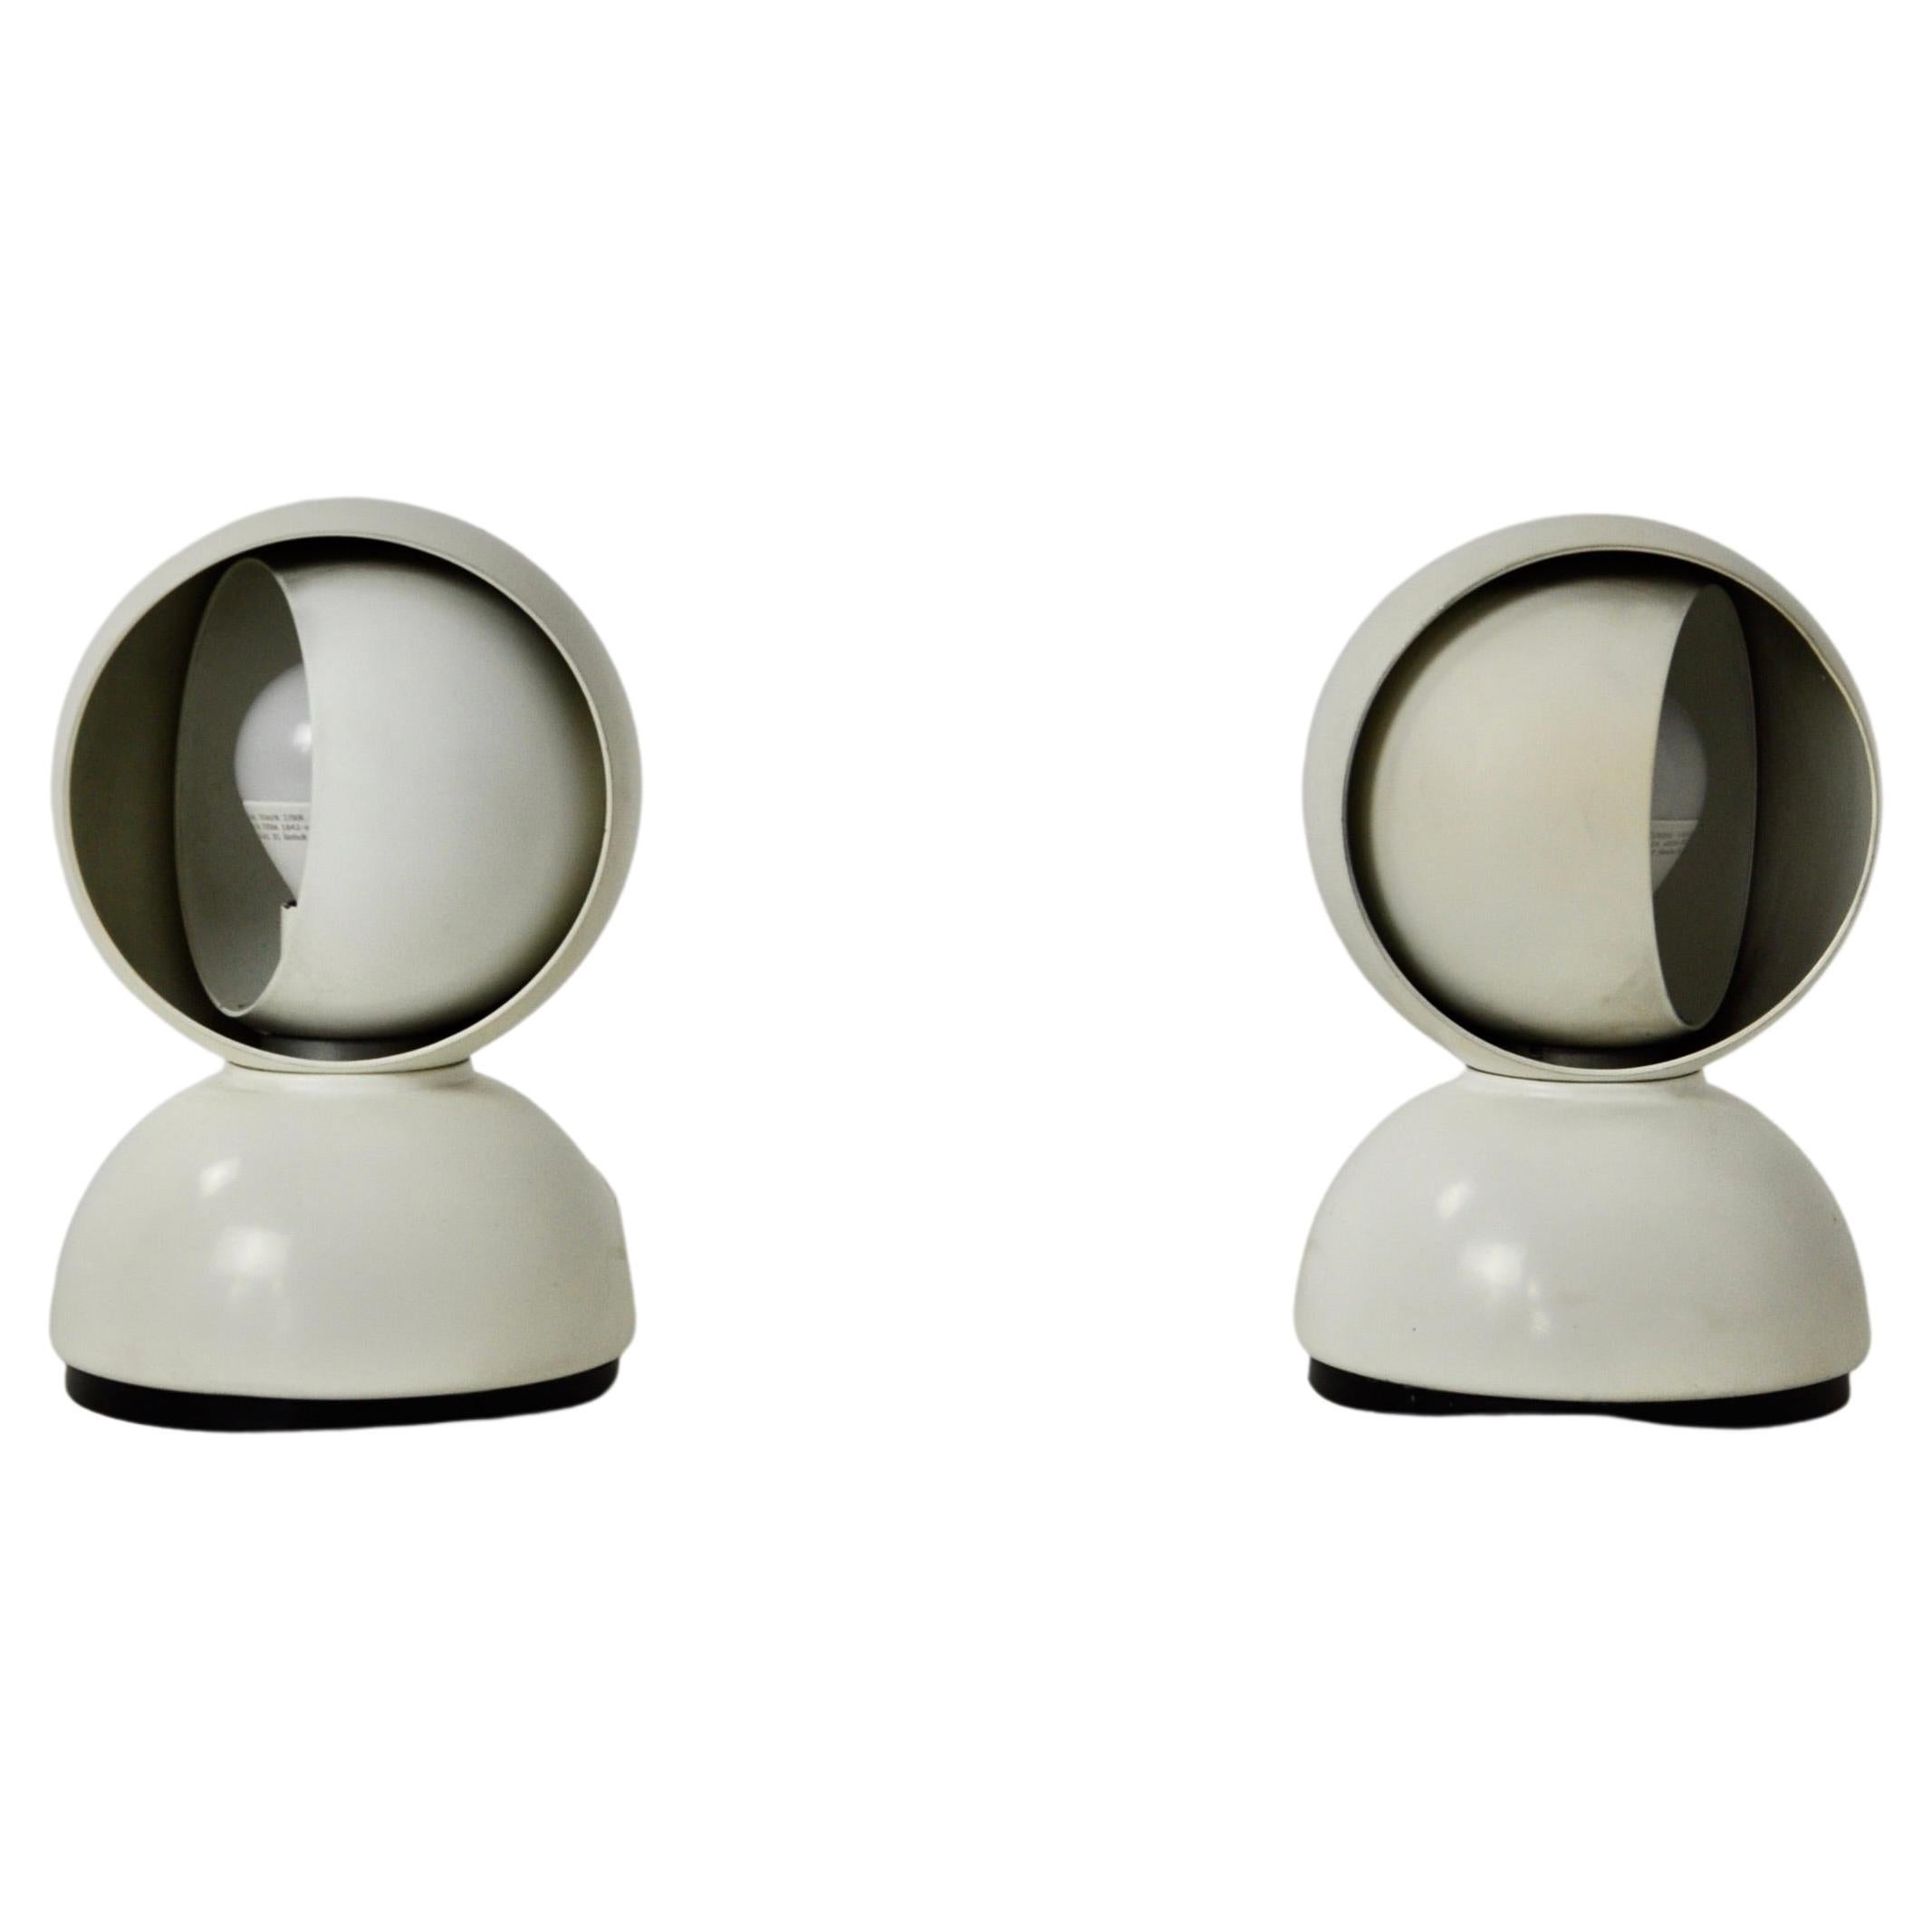 Eclipse Table Lamps by Vico Magistretti for Artemide, 1960s, Set of 2